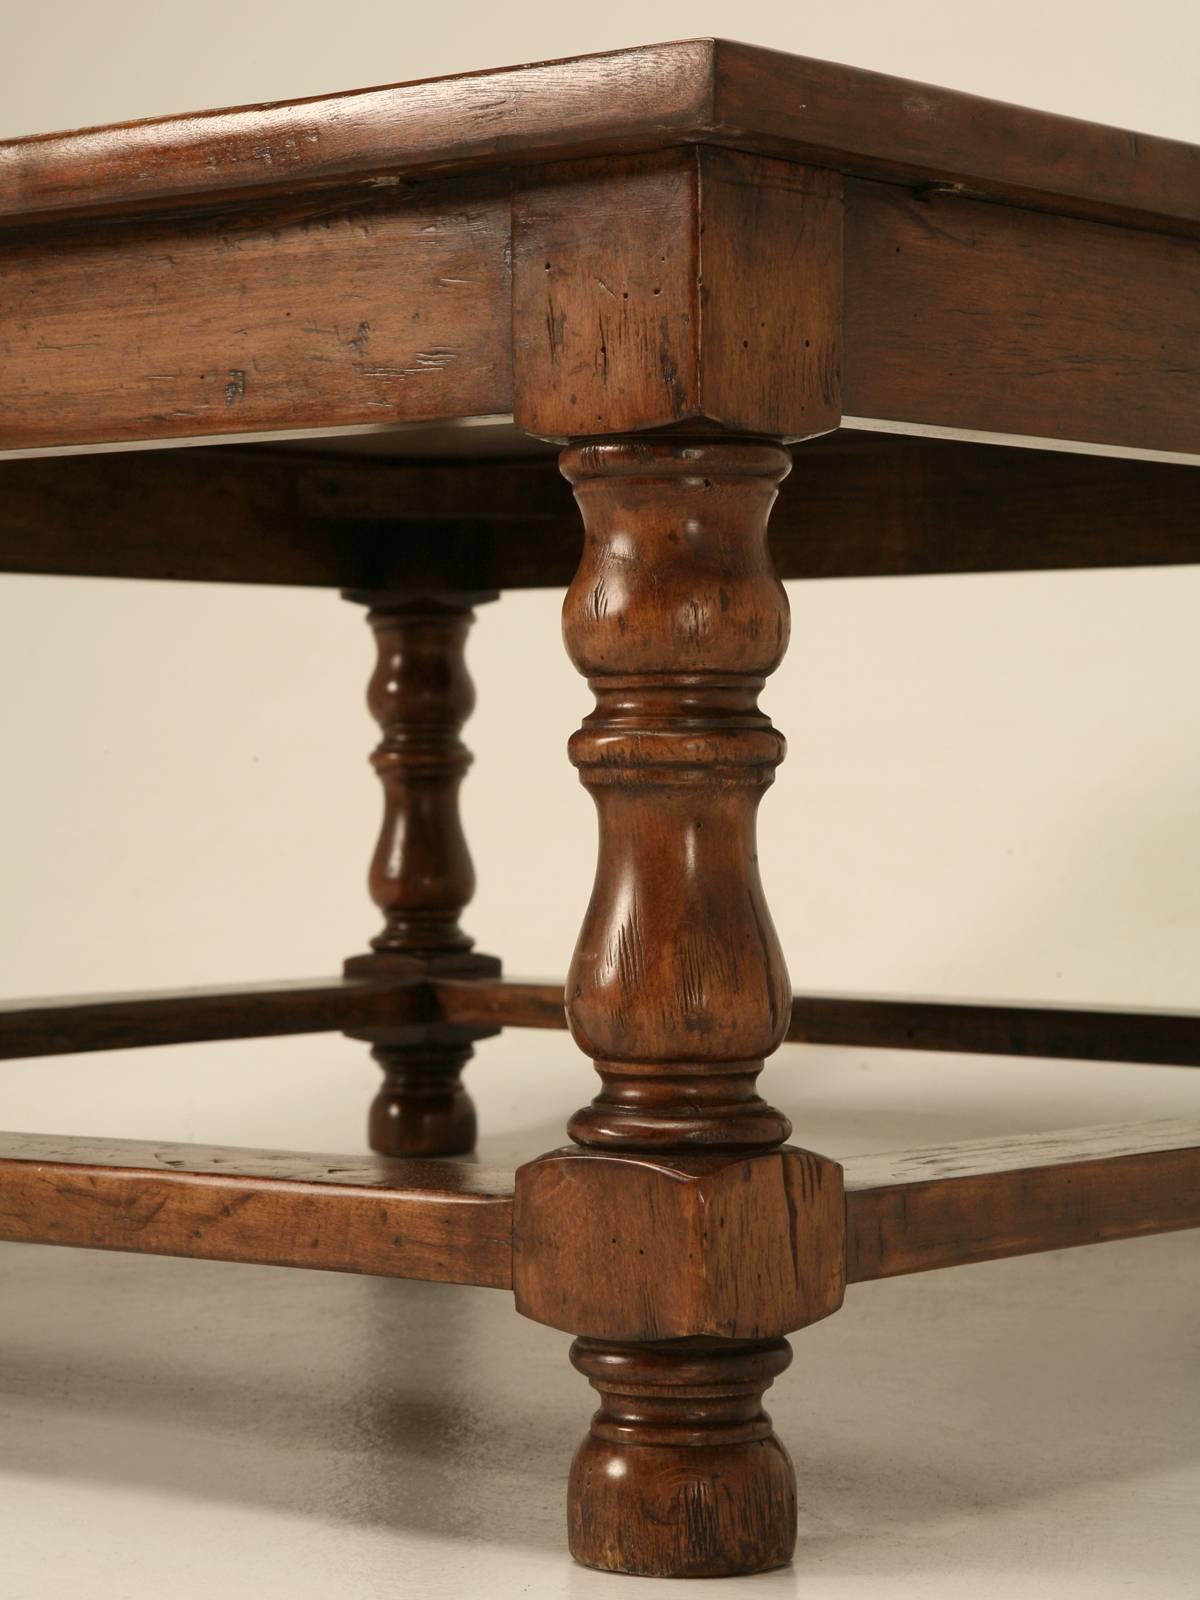 Walnut Inlaid French Inspired Square Coffee Table Hand-Crafted by Old Plank in Chicago For Sale